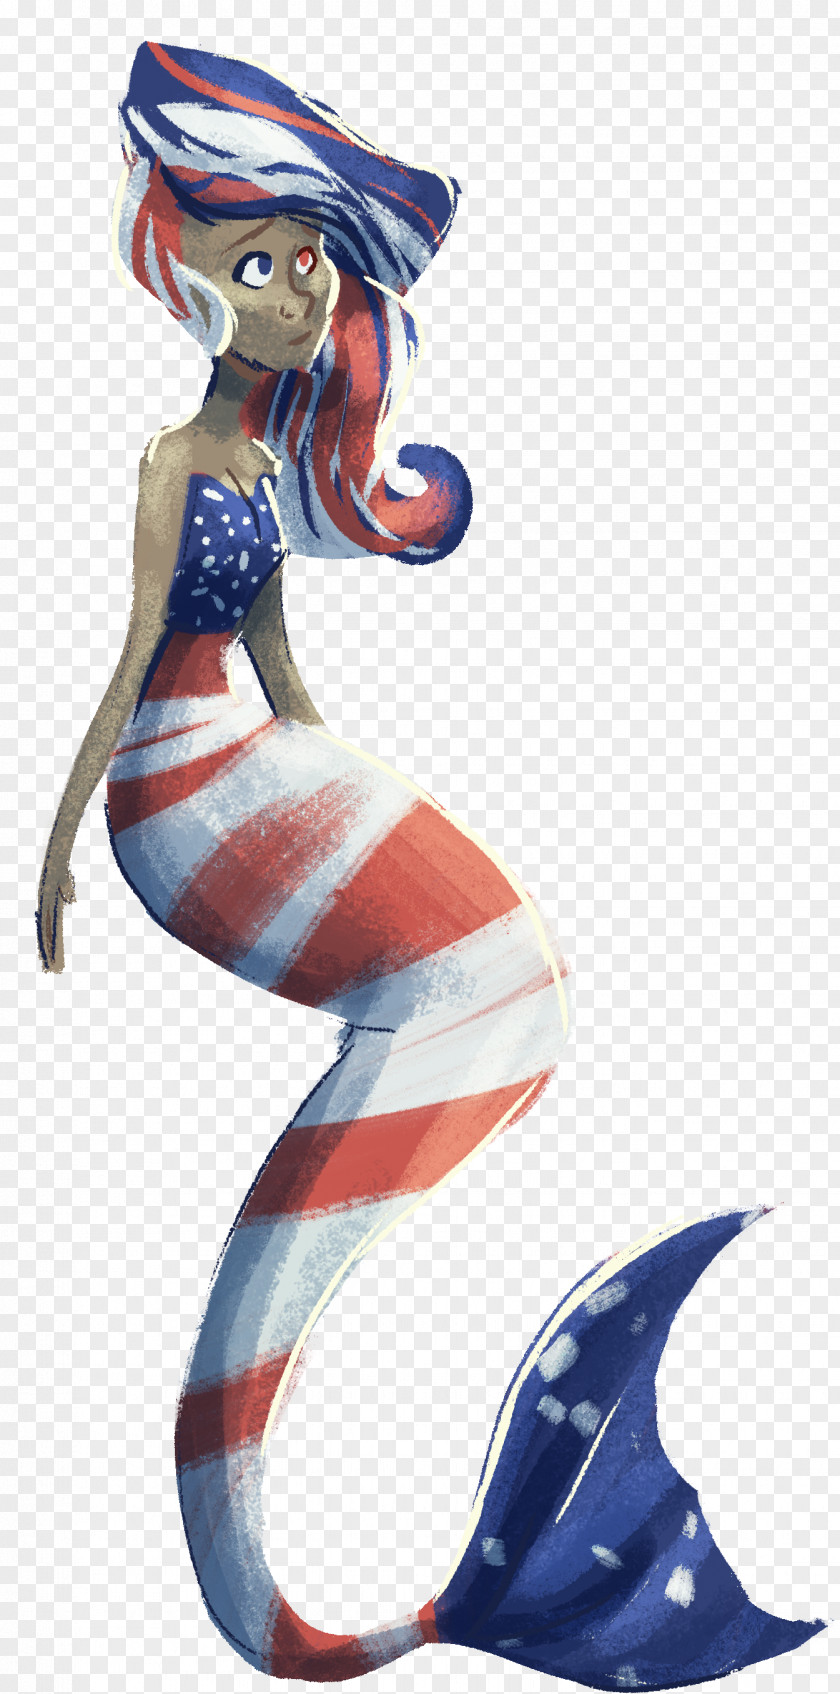 Rememberence Illustration Pin-up Girl Mermaid Costume Design Figurine PNG